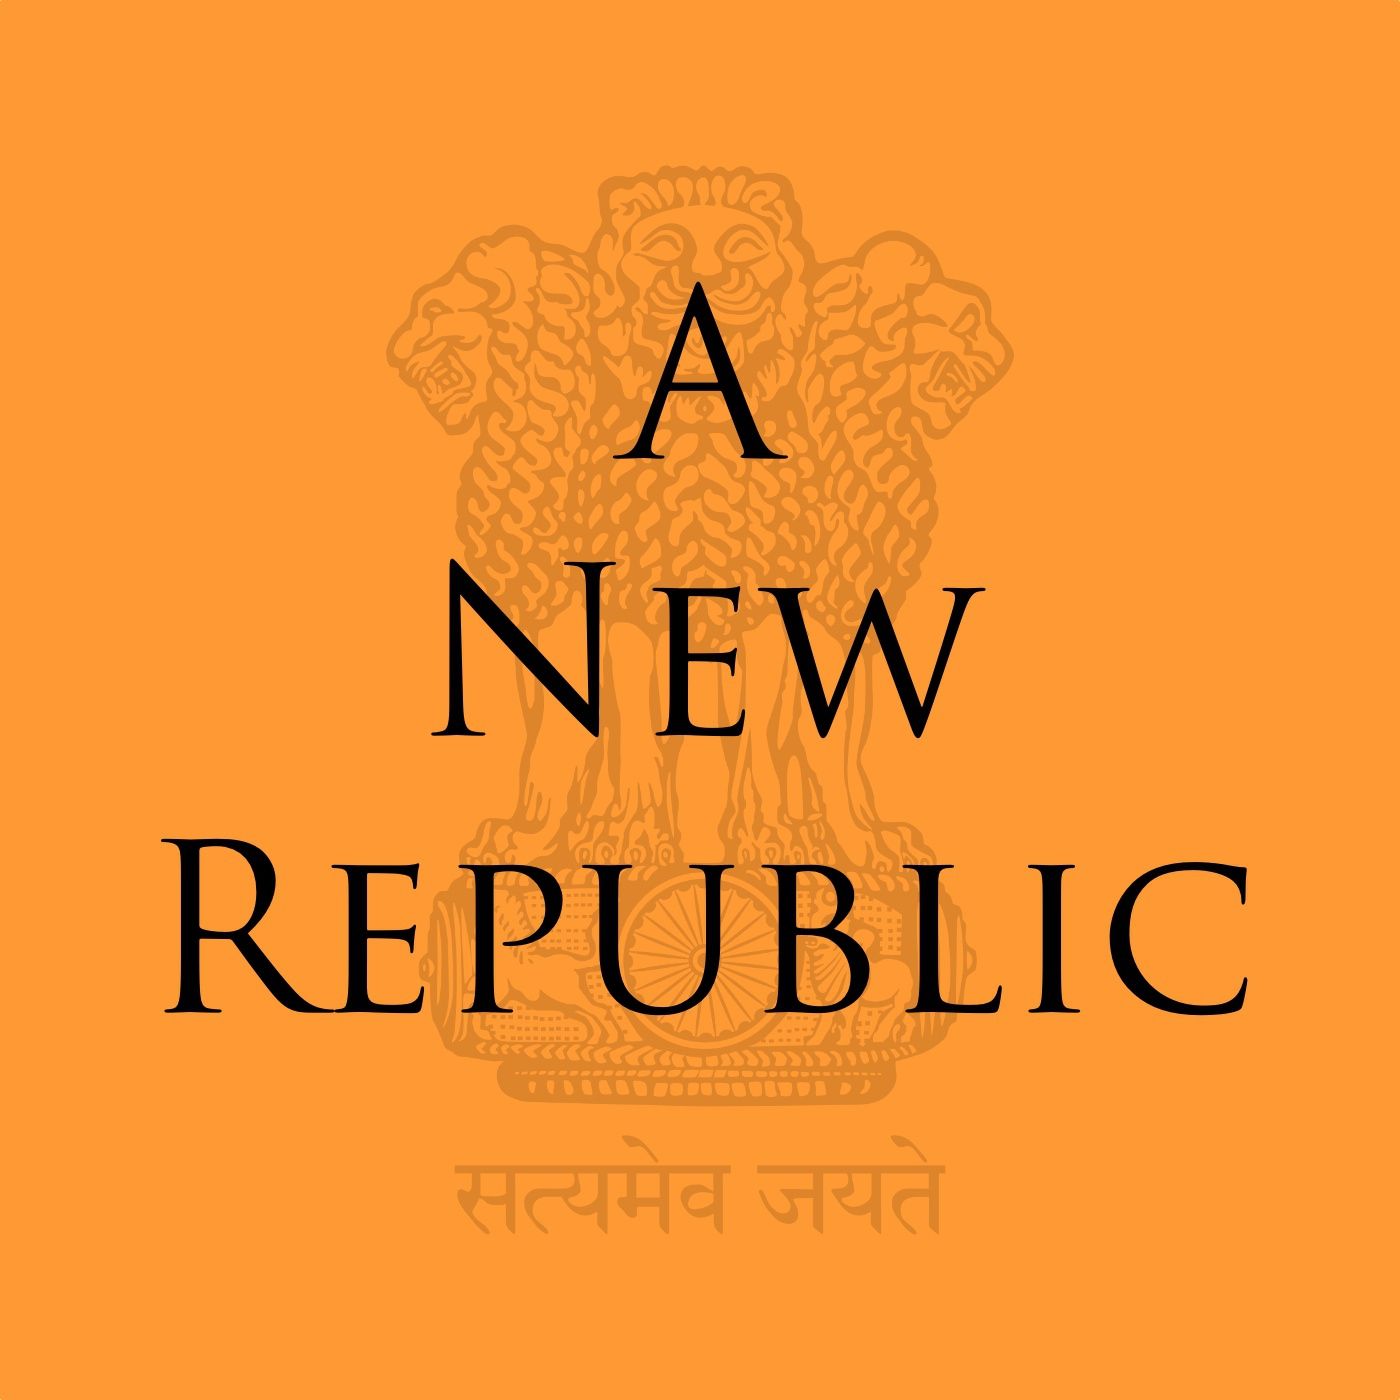 A New Republic - Episode 10: The Aundh Experiment